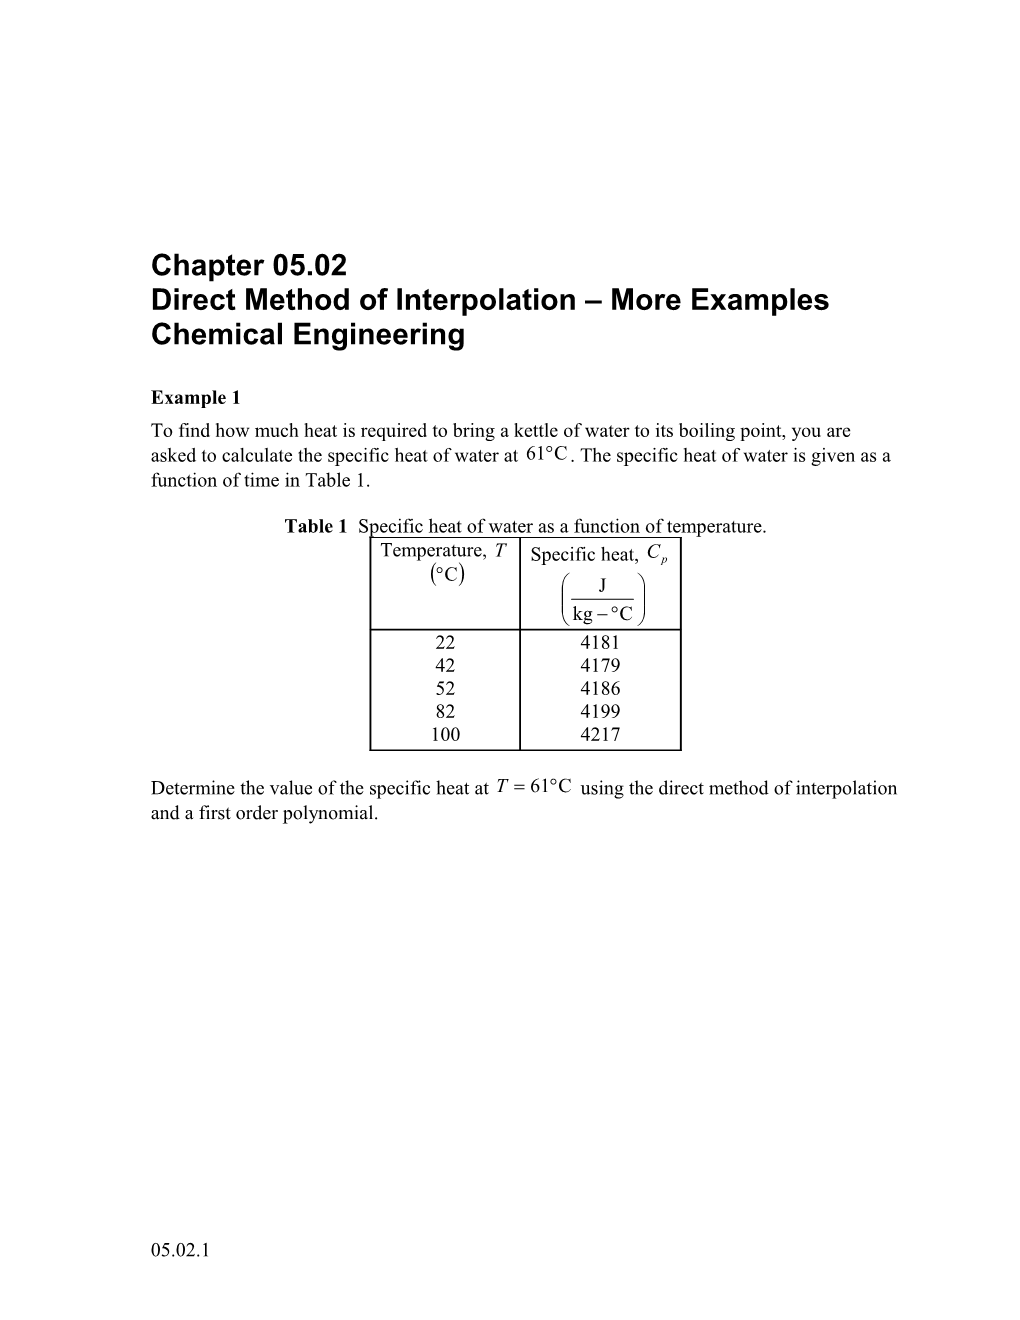 Direct Method of Interpolation-More Examples: Chemical Engineering